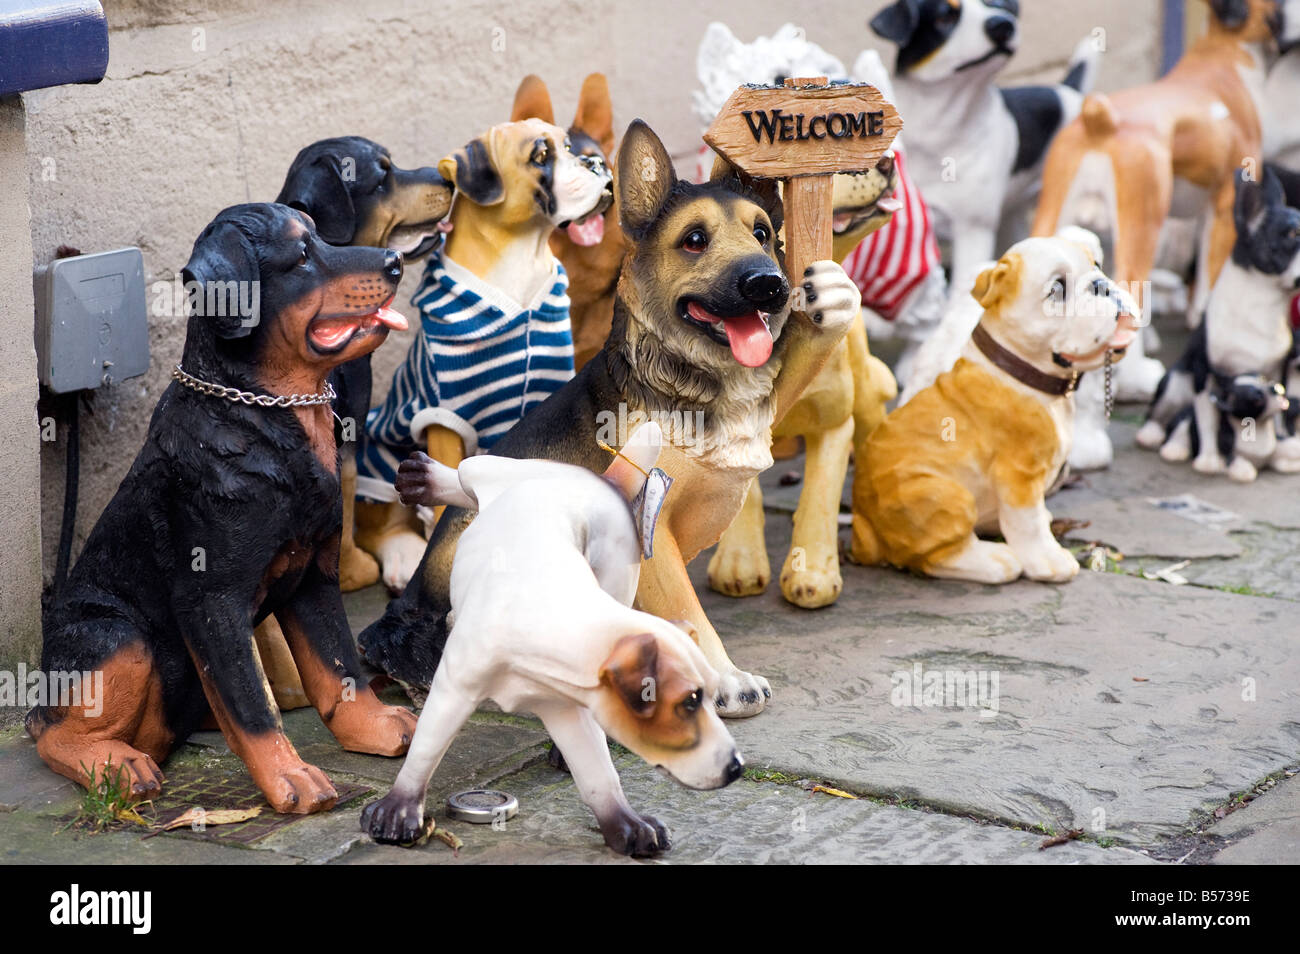 Comical mixed breeds of pot dogs displayed on a pavement Stock Photo